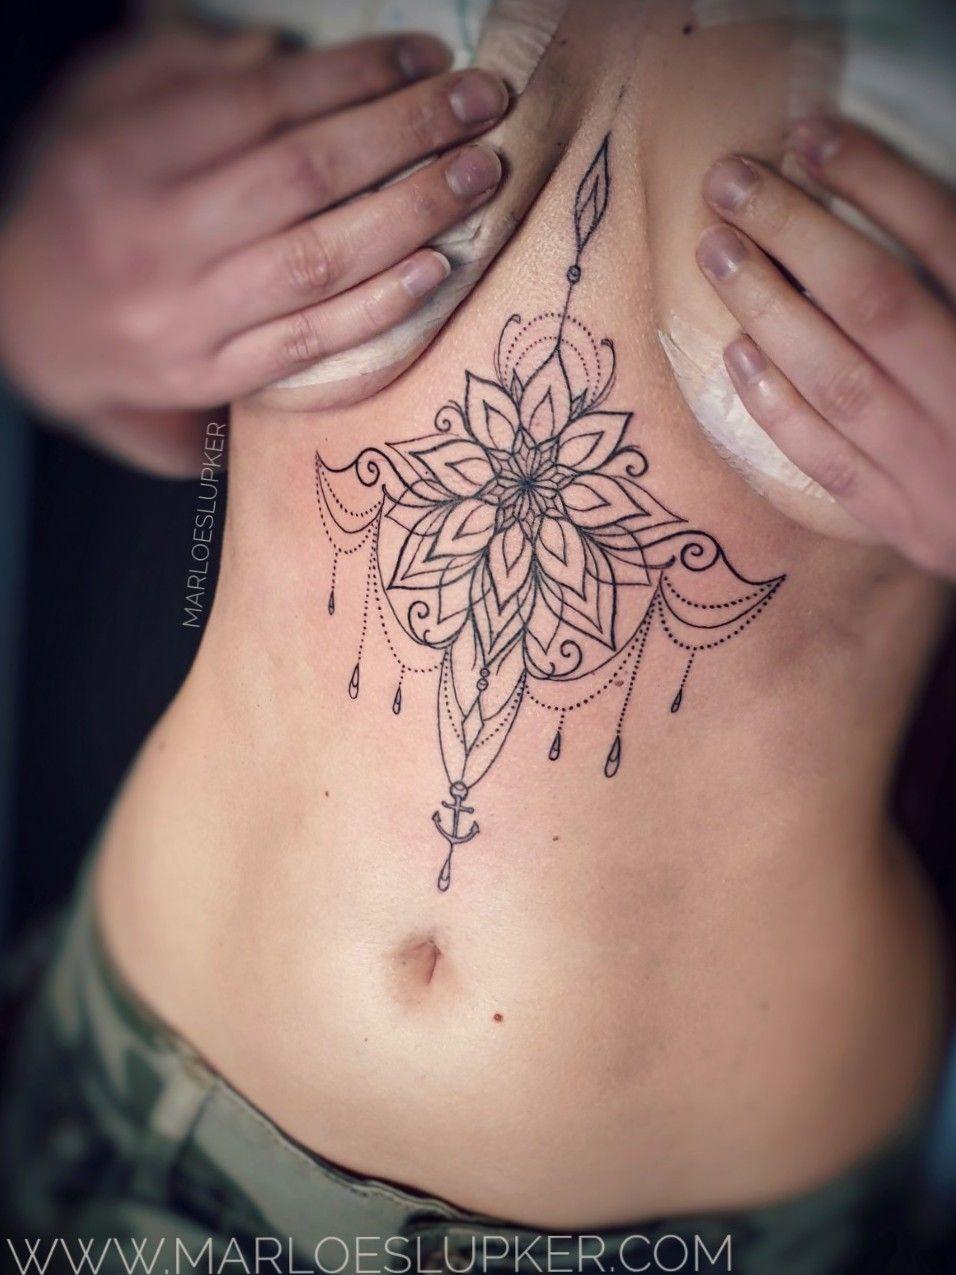 StanLight Ink Tattoo  Underboob mandala done by Stan Contact us to book  in  L I G H T I N K TATTOOSTUDIO For bookings get in touch  wwwlightinktattoocouk Email 